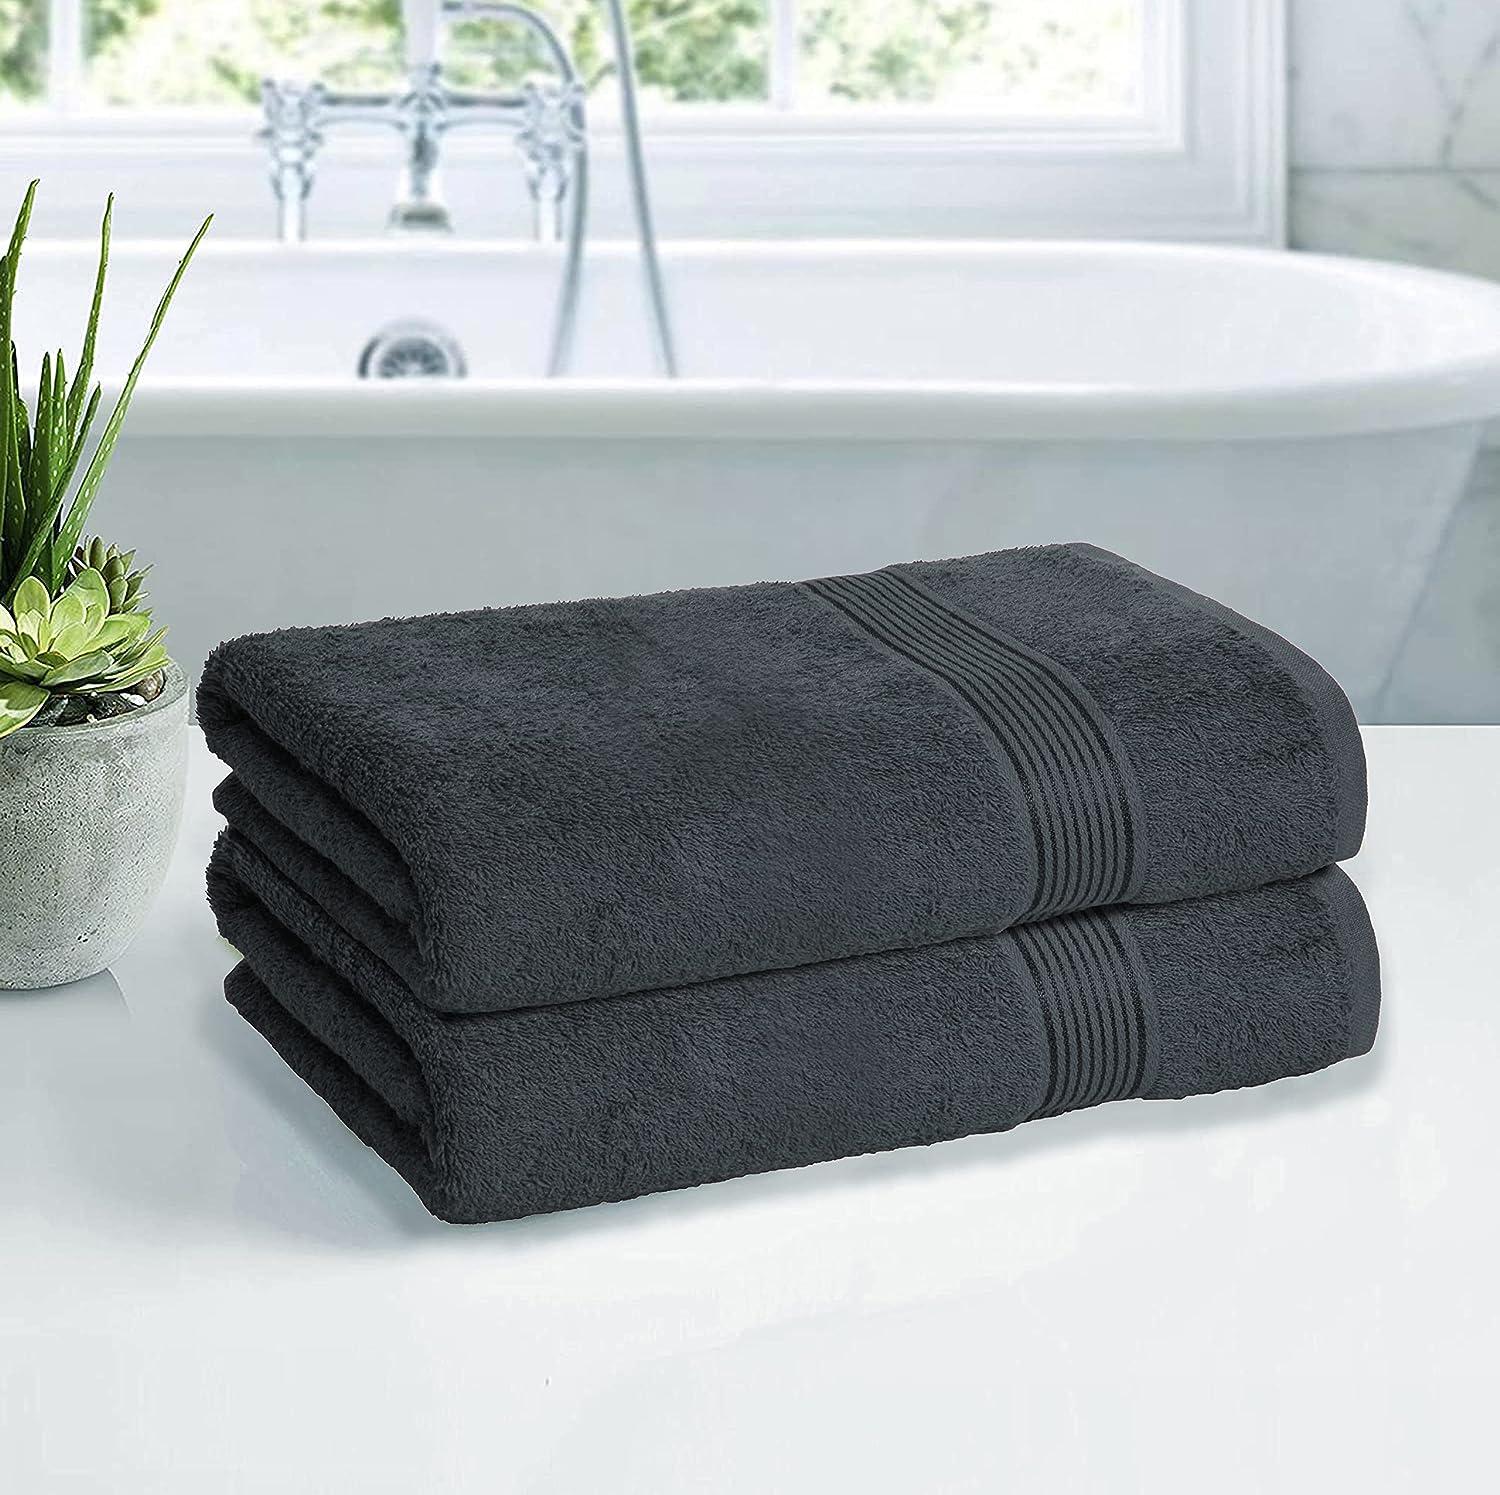 Belizzi Home Cotton 2 Pack Oversized Bath Towel Set 28x55 inches